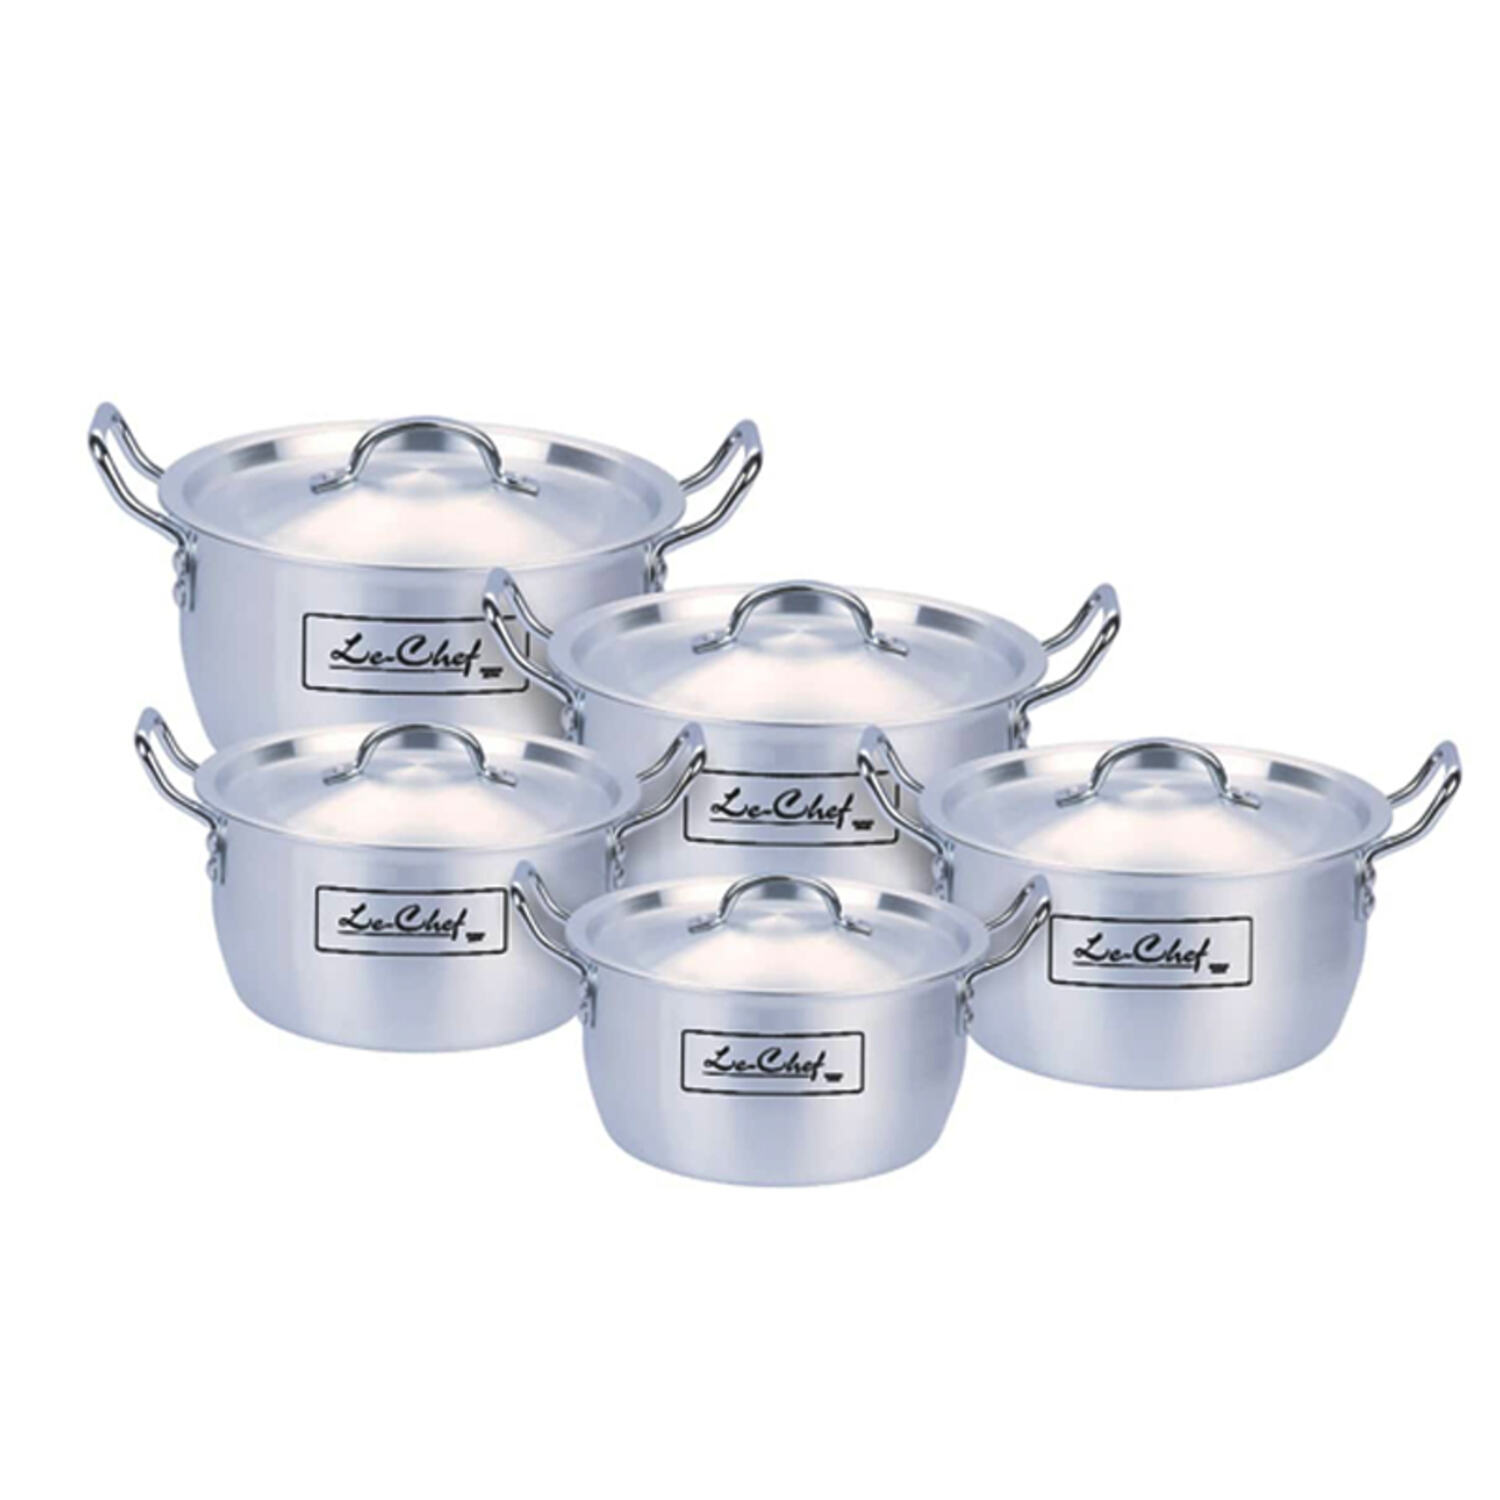 Le Chef Metal Finish Superior Topical Cooking Pot 5 Pcs Set (12x16) 6x10 With Durable Handles And Heavy Lids Original Made In Pakistan